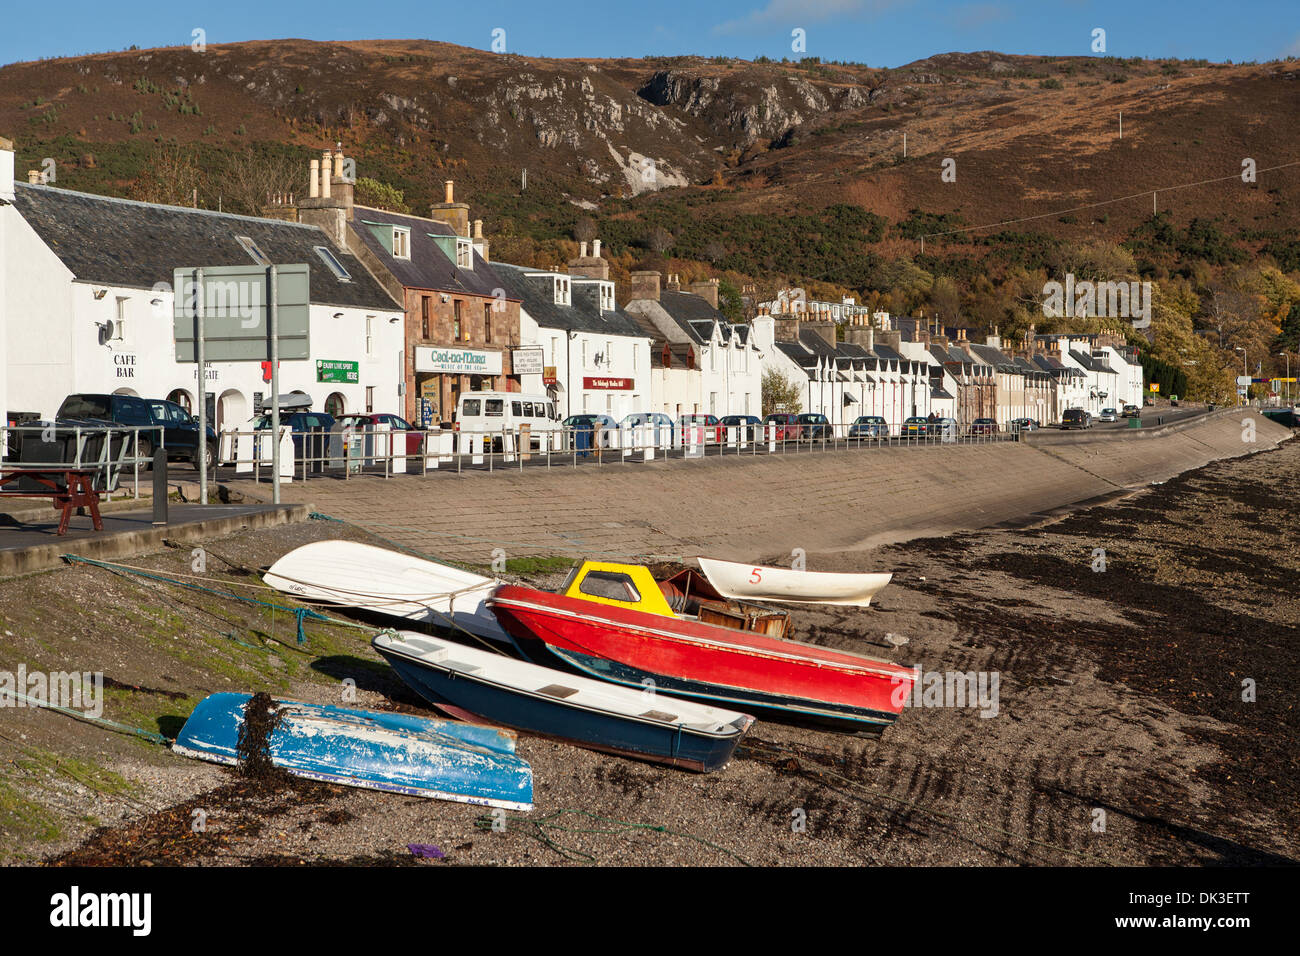 Boats and Loch Broom, Ullapool, Wester Ross, Highlands, Scotland Stock Photo